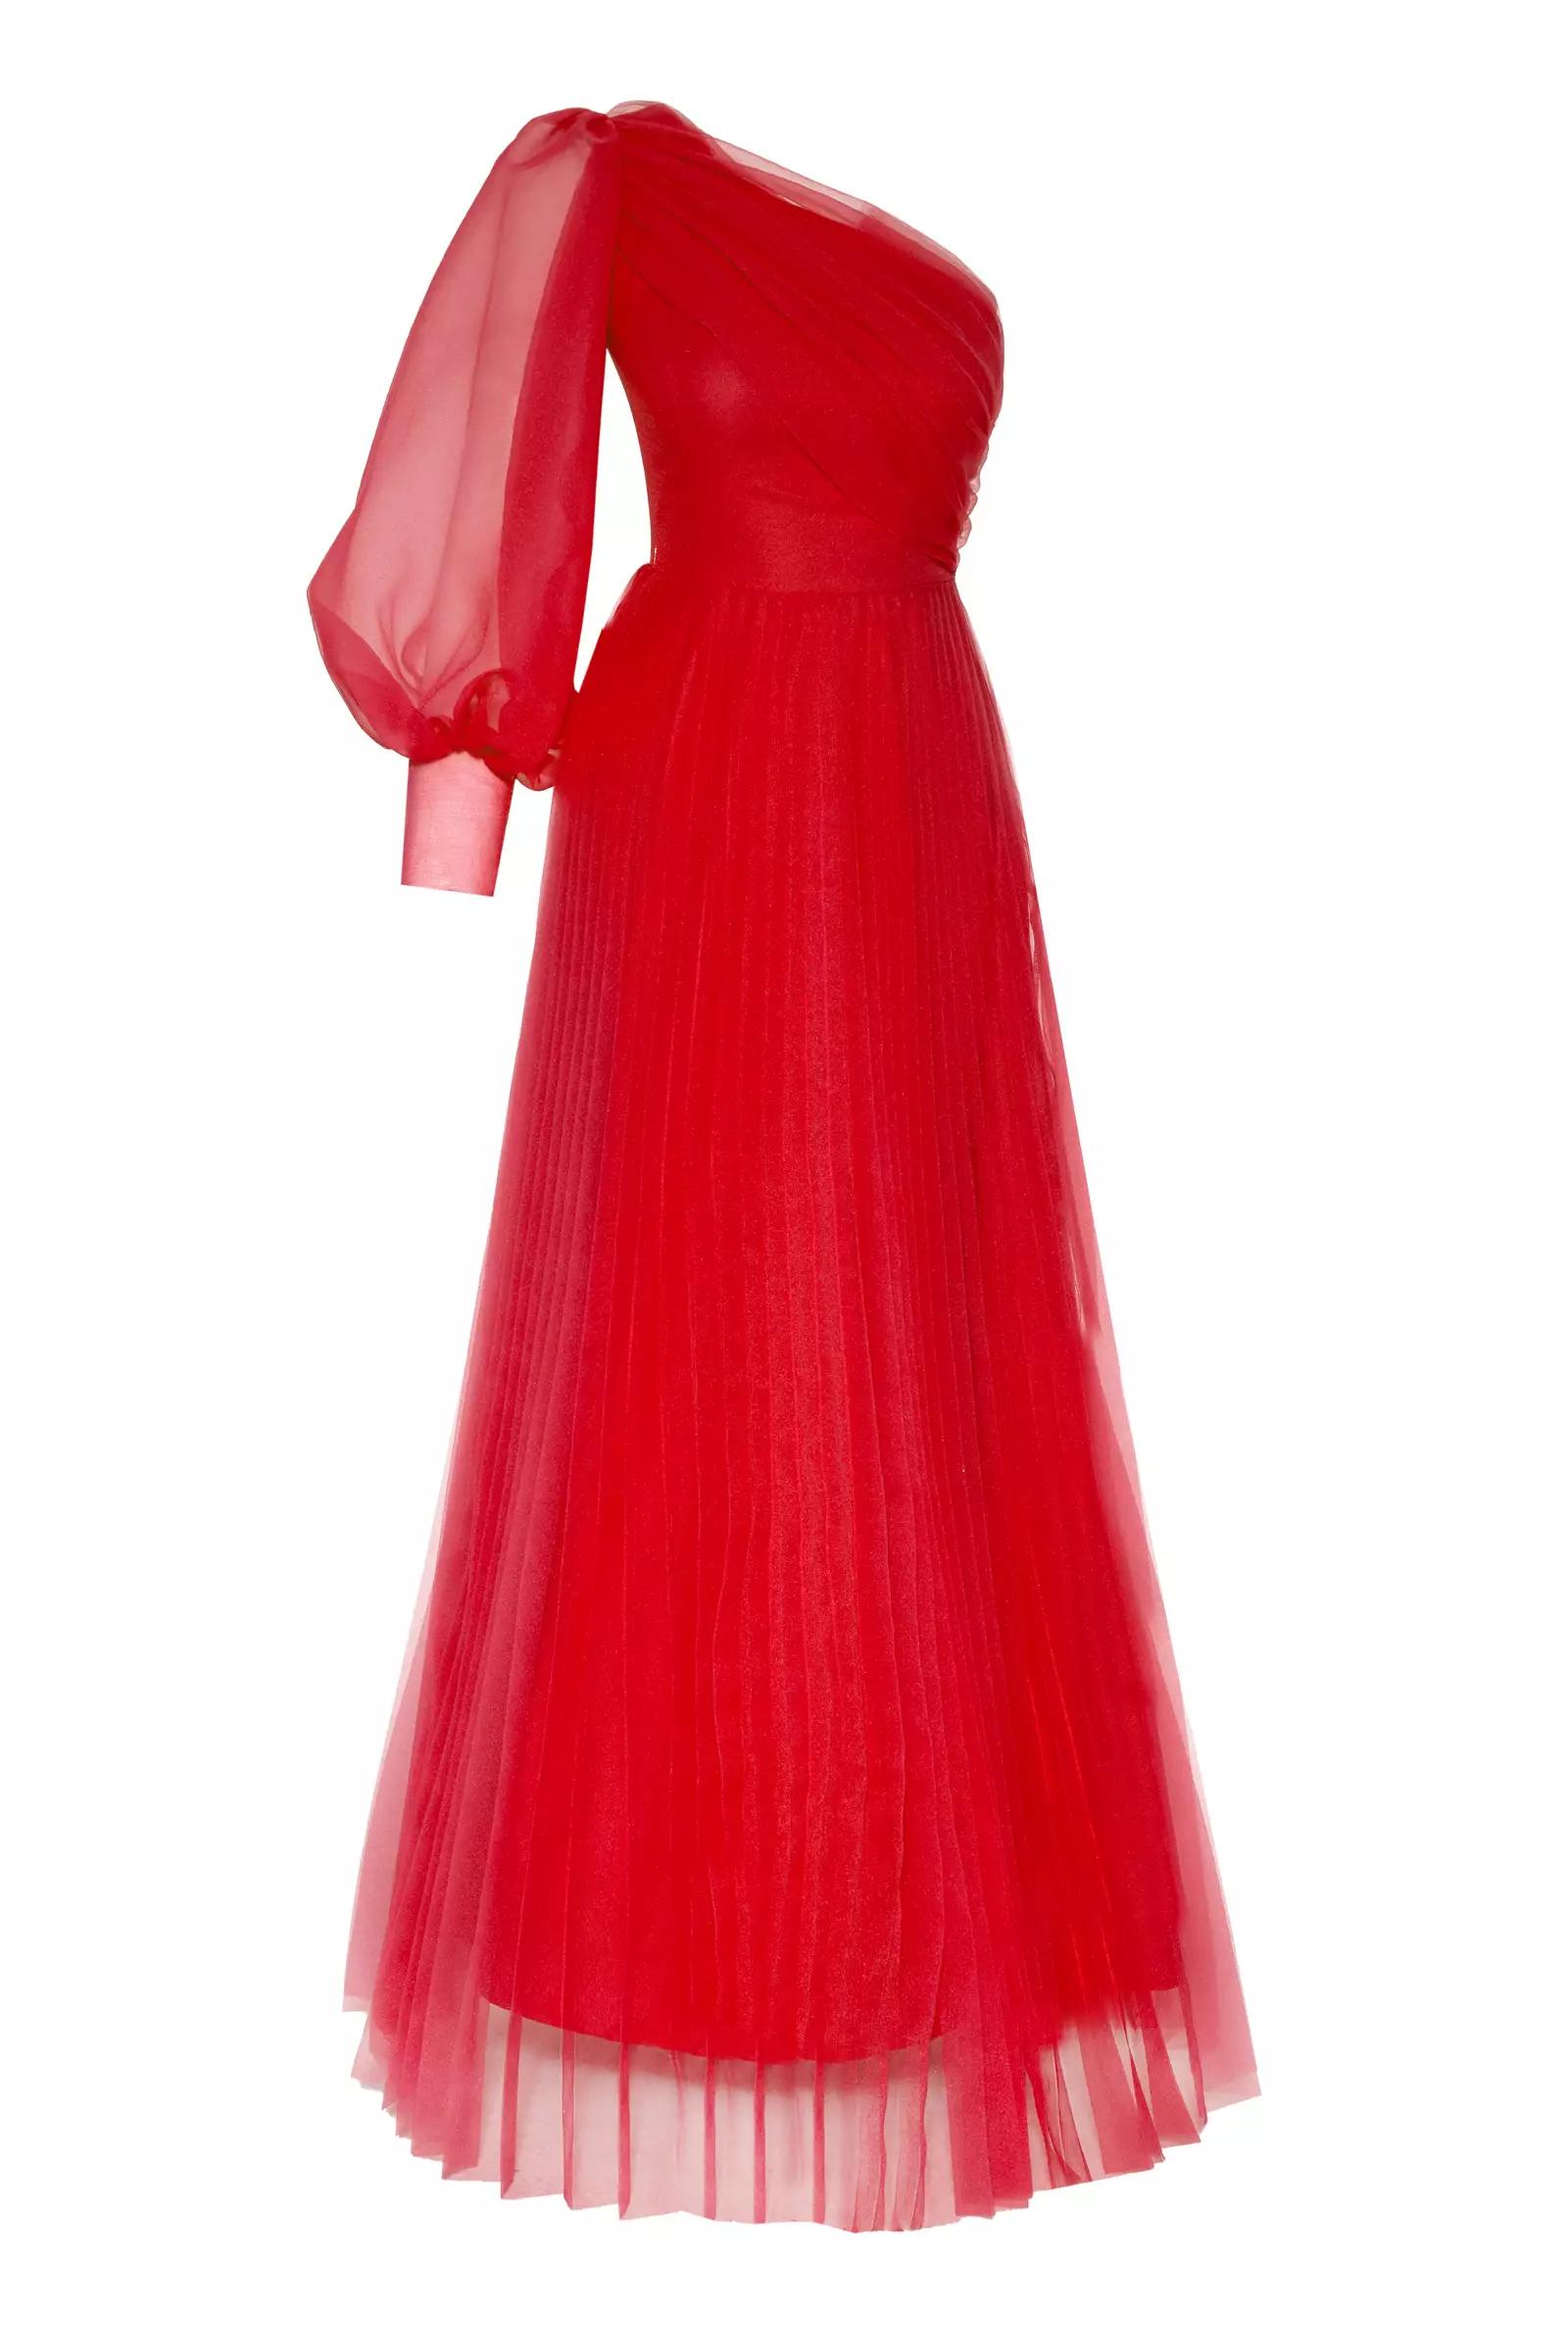 Red tulle one arm long dress